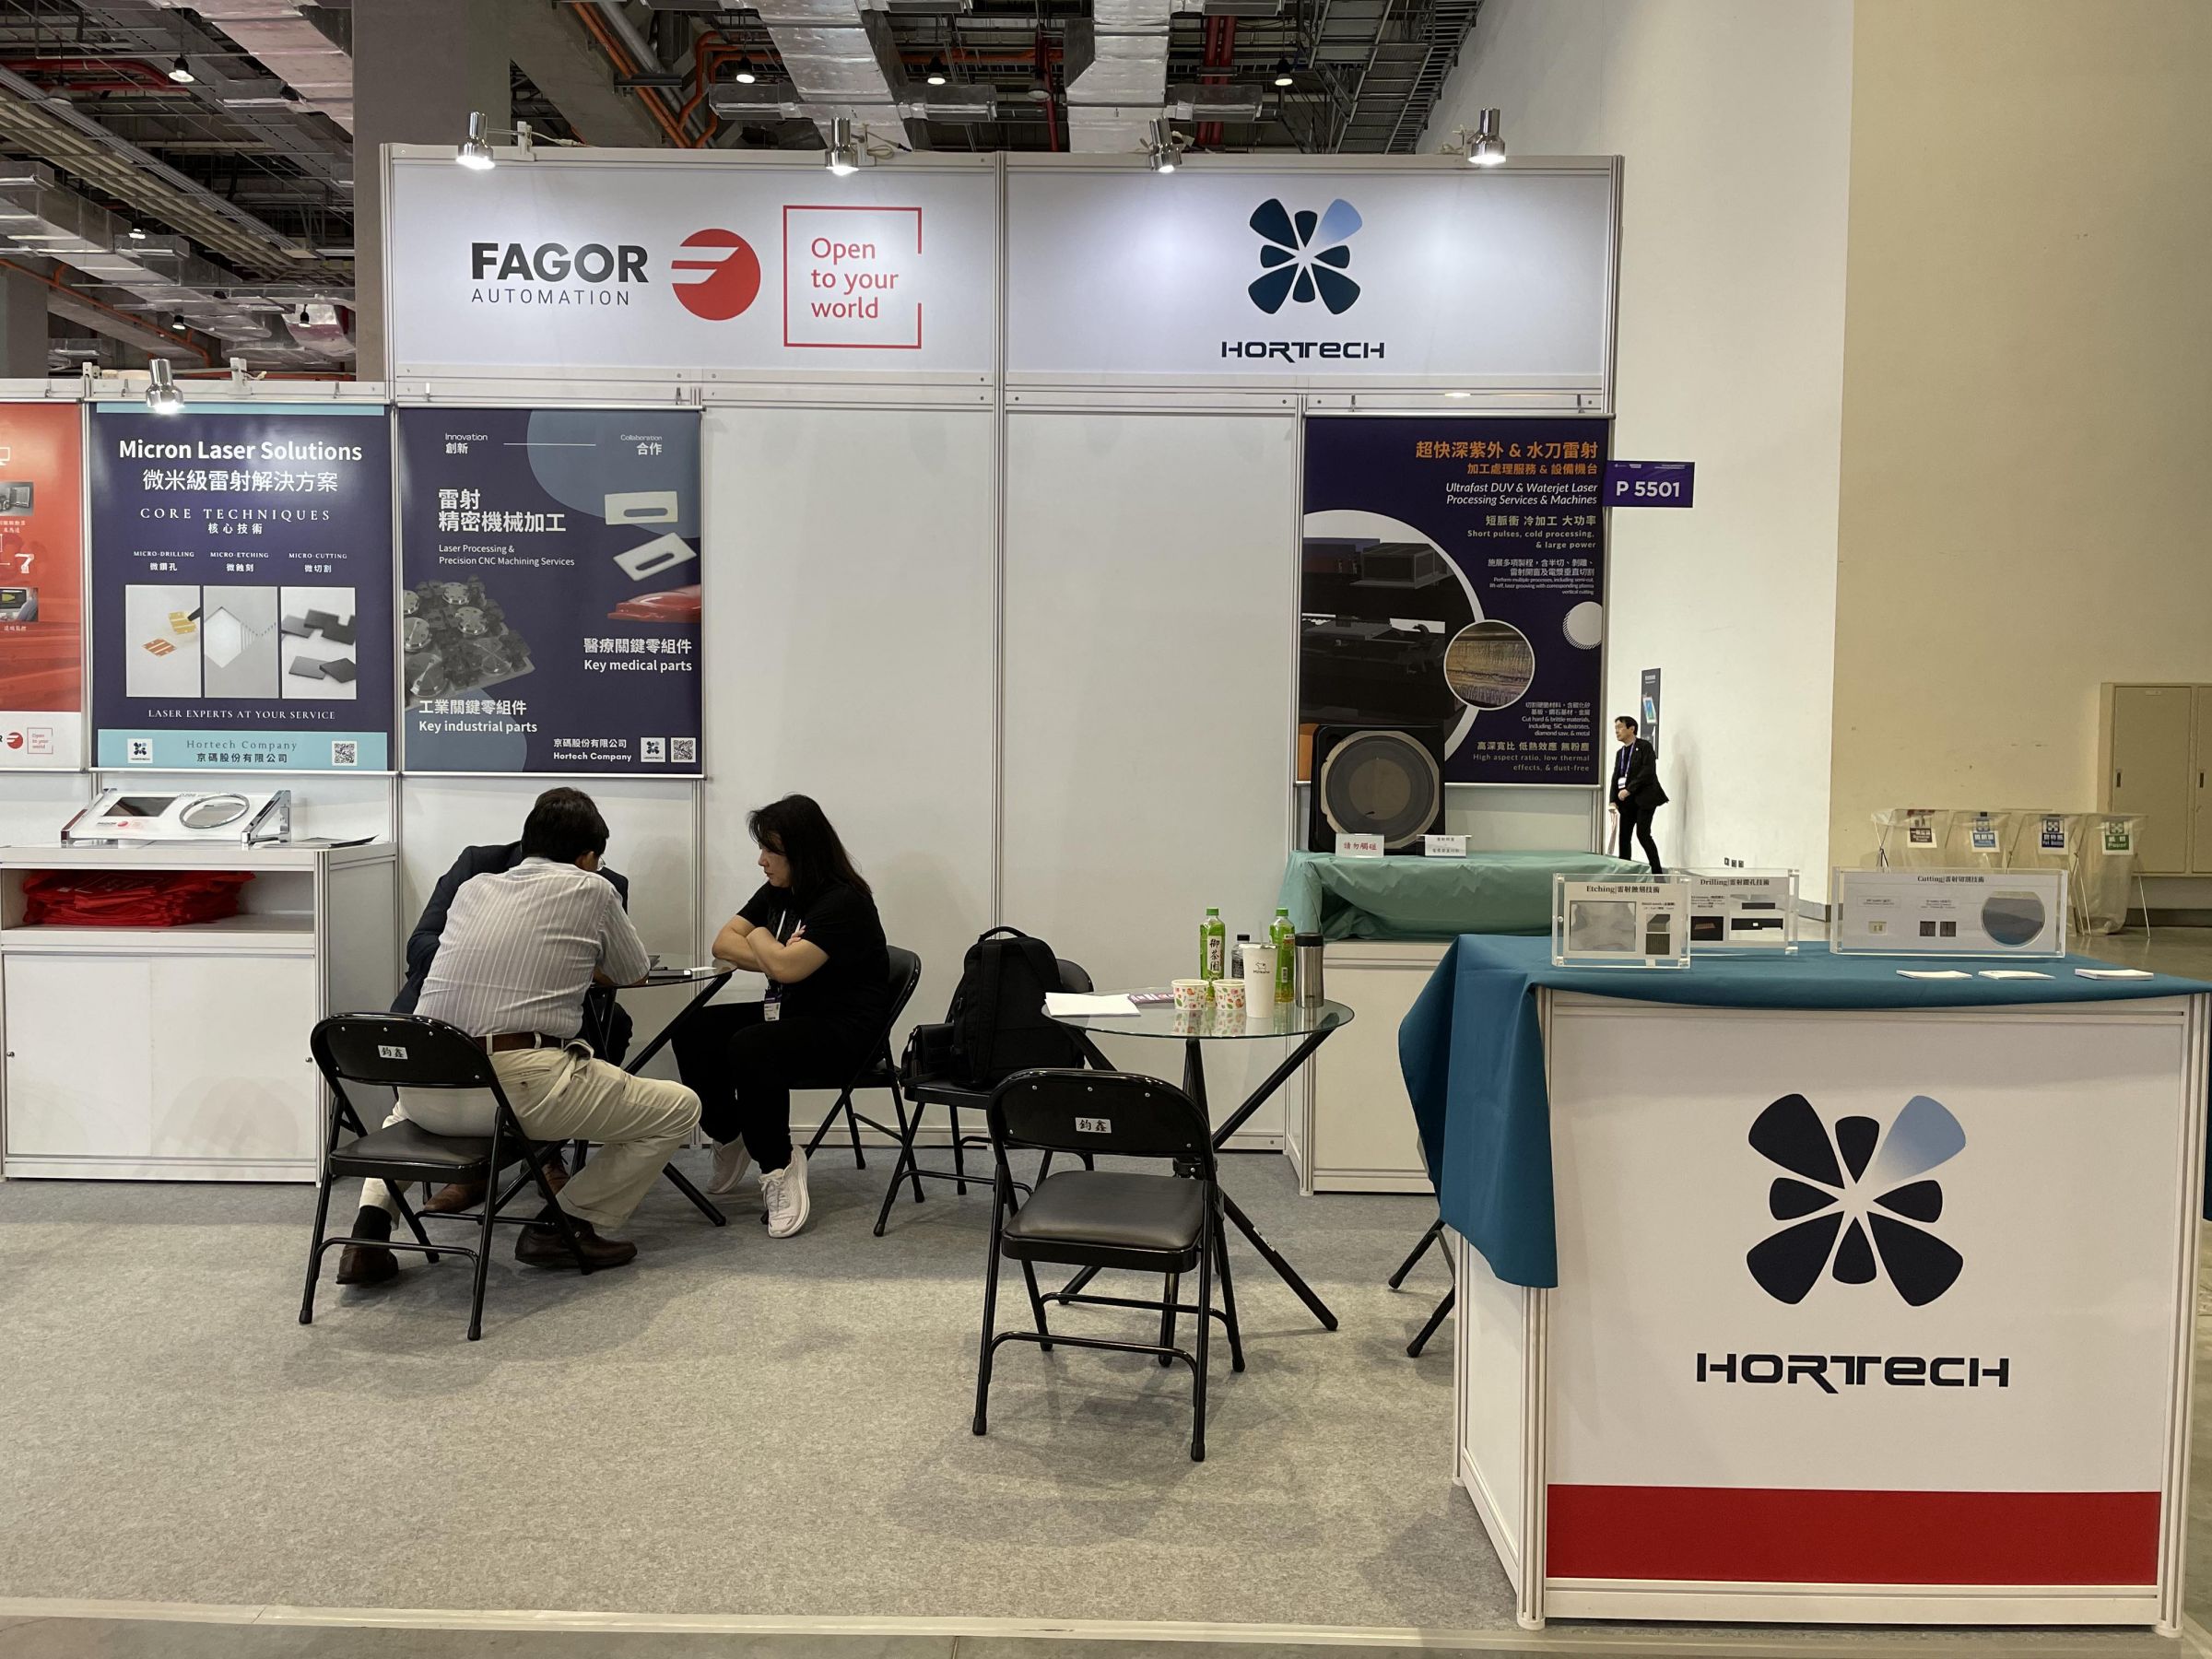 Hortech Company
Booth: P5501
Semicon Taiwan, TaiNEX 1 & 2
Sep. 06-08, 2023